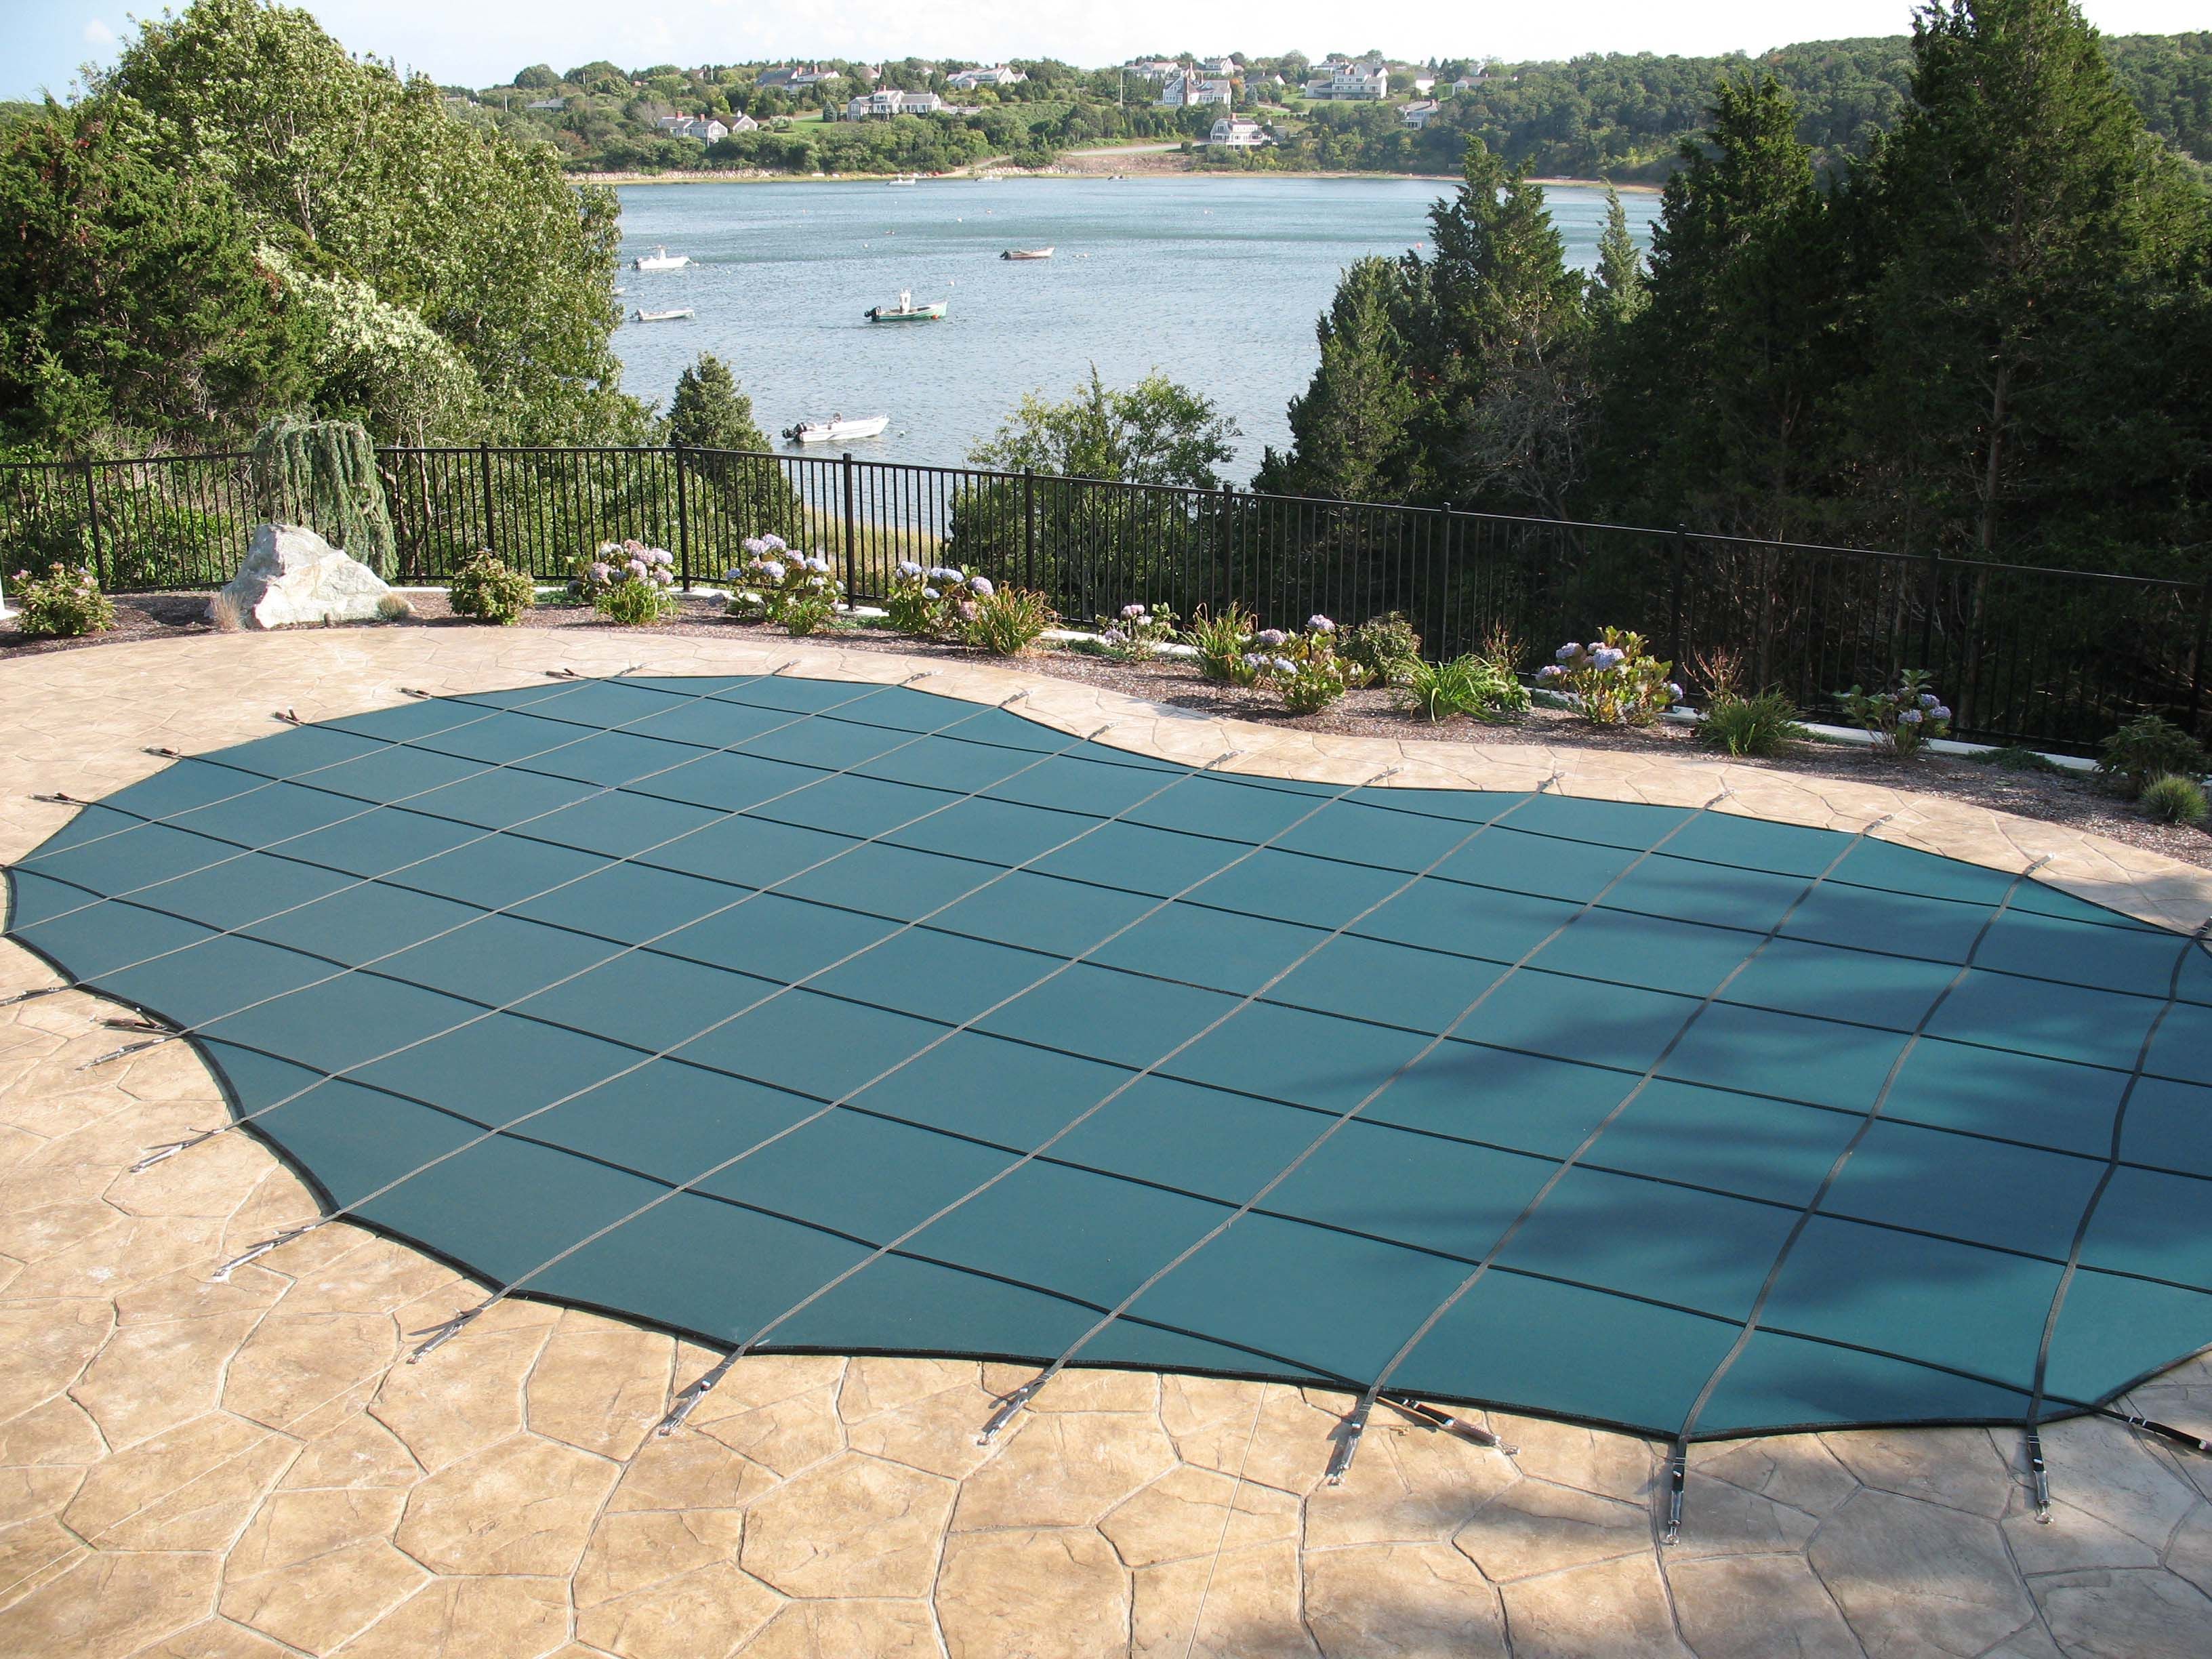 Merlin SmartMesh Safety Pool Covers